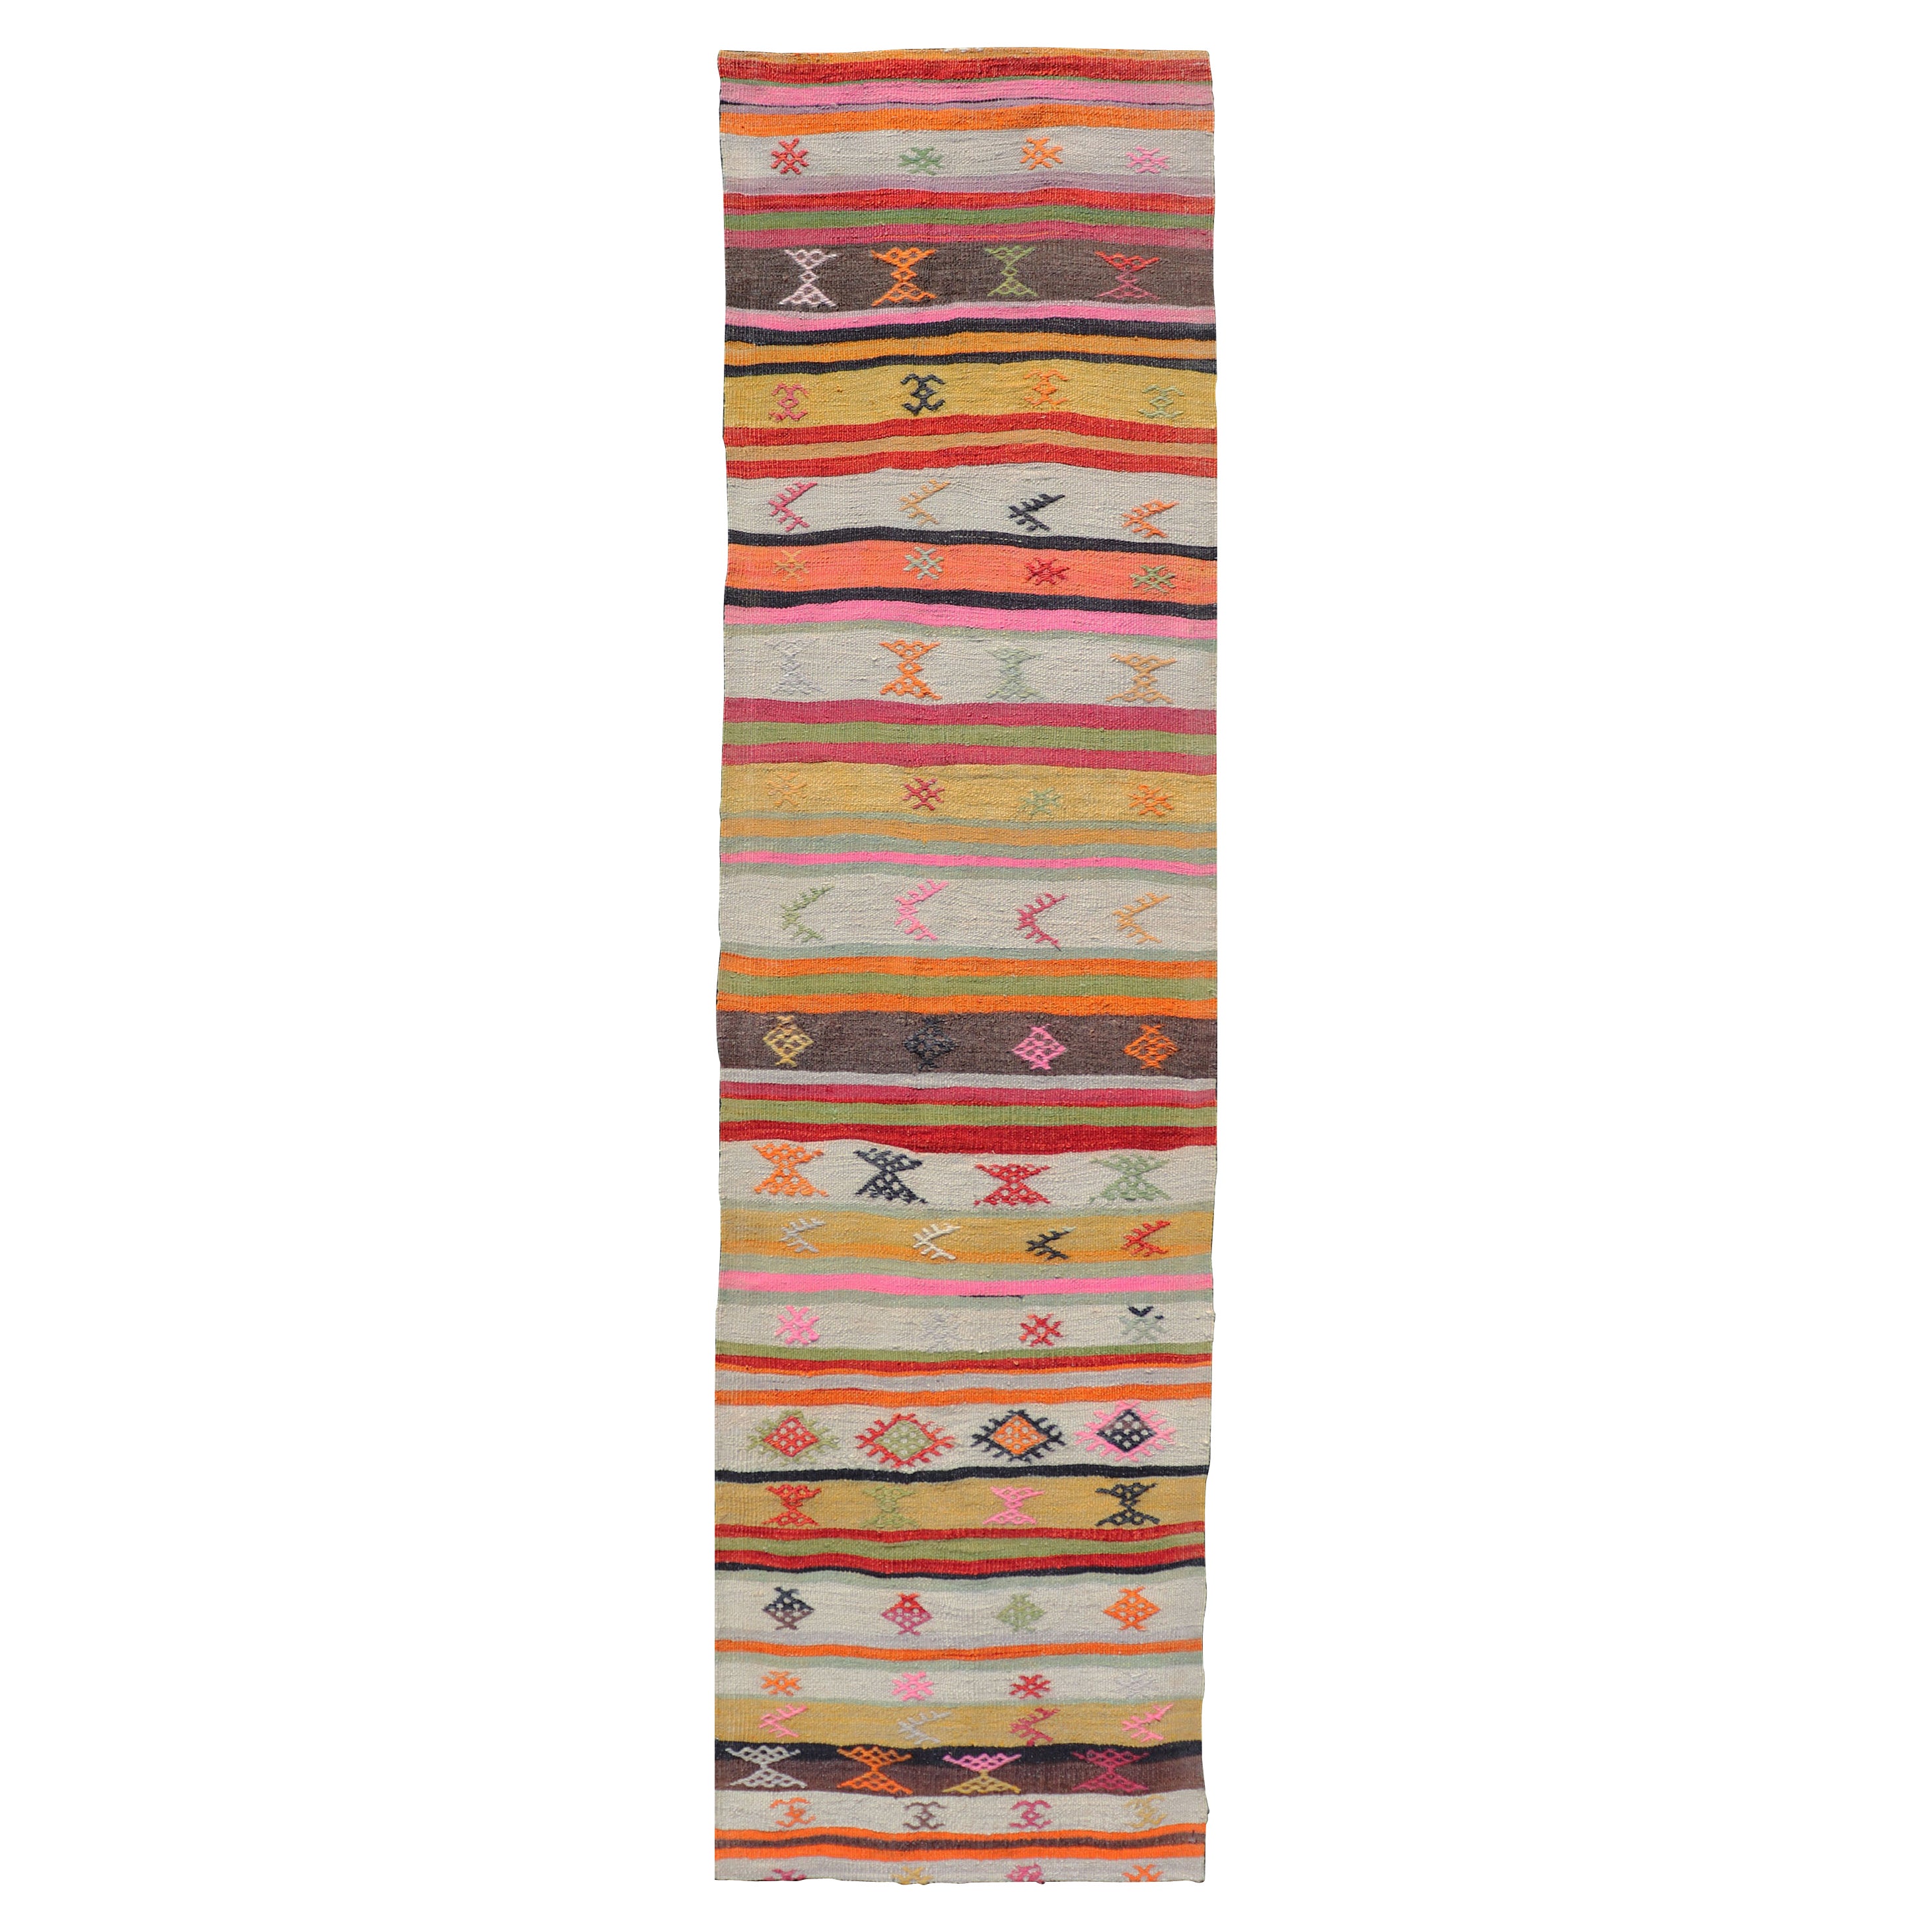 Vintage Hand Woven Turkish Kilim Colorful Stripe Runner with Tribal Motifs